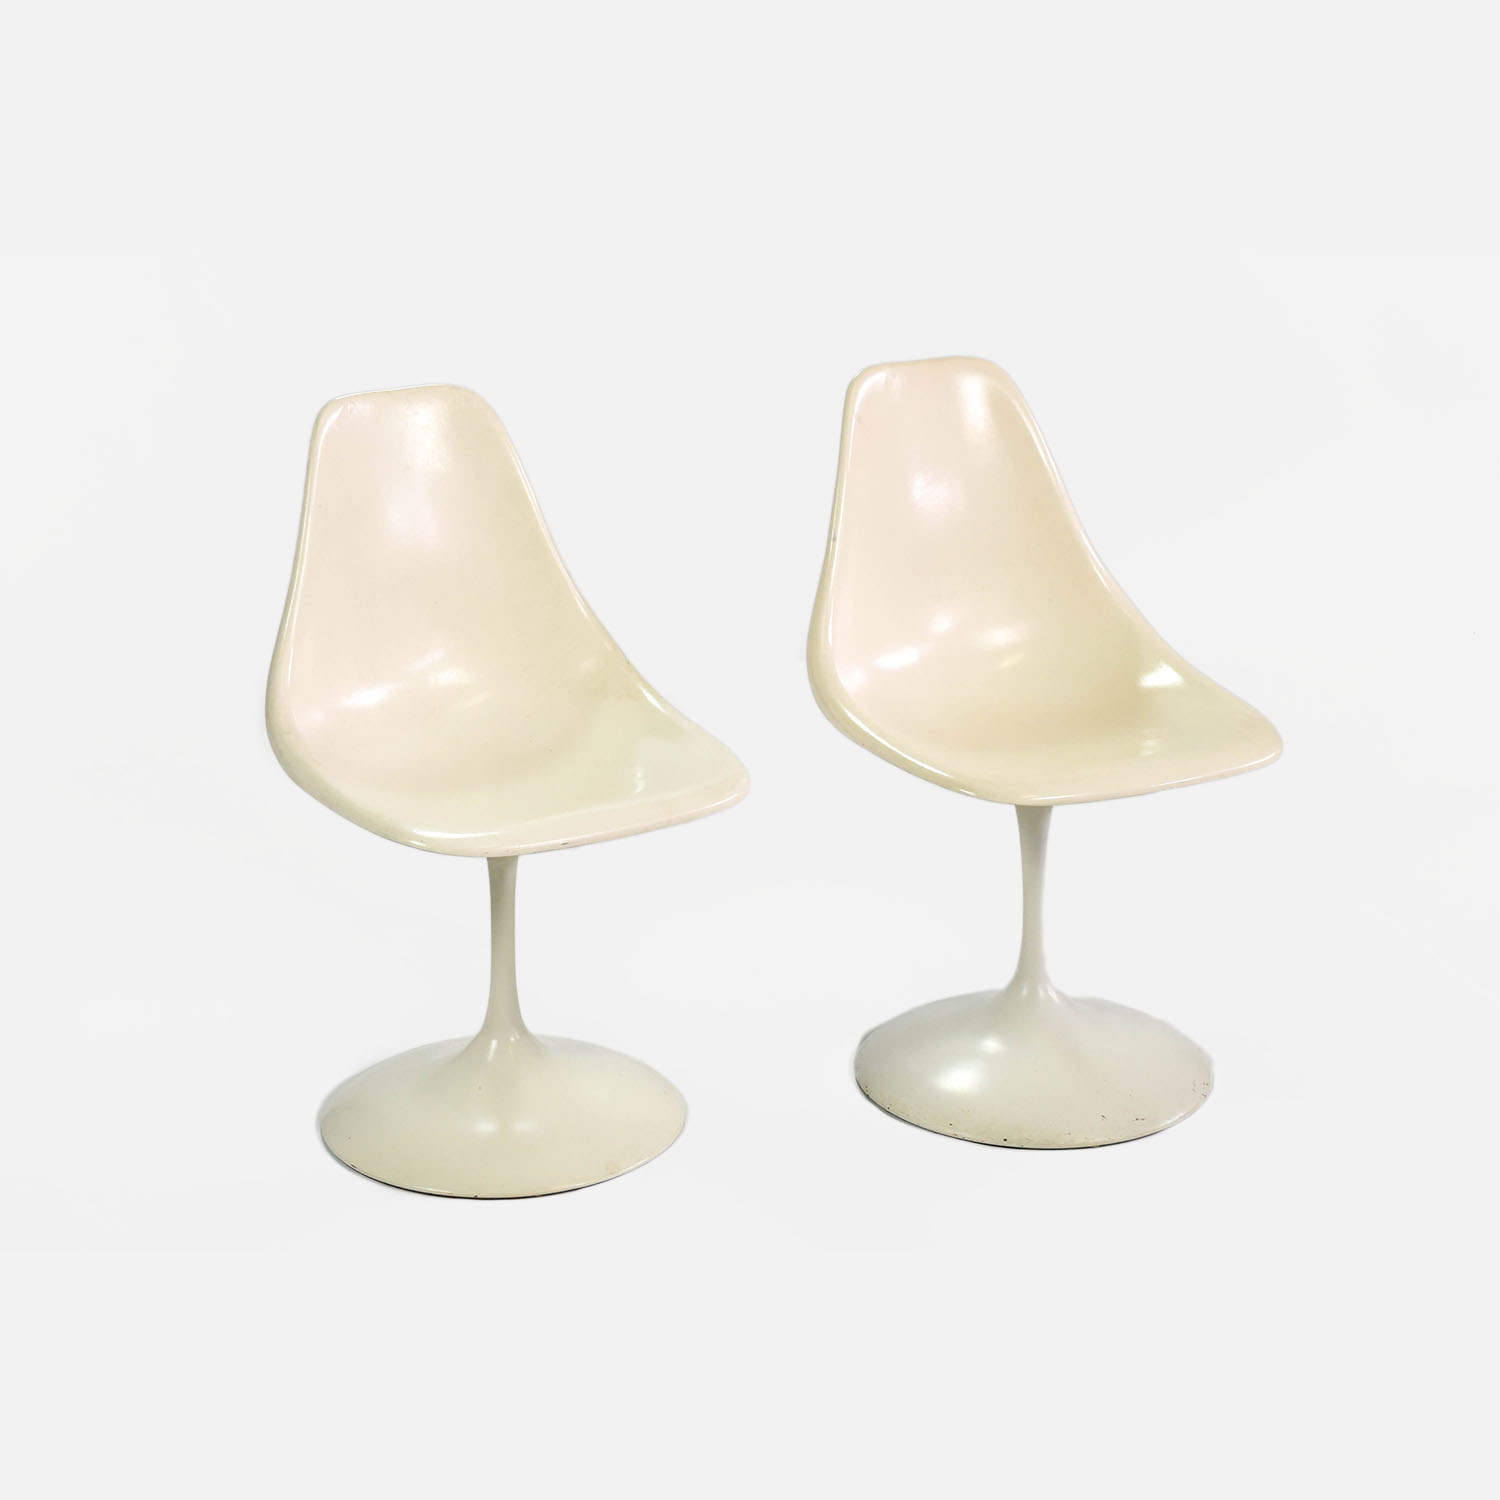 Two 1960s MCM White Tulip Swivel Side Chairs